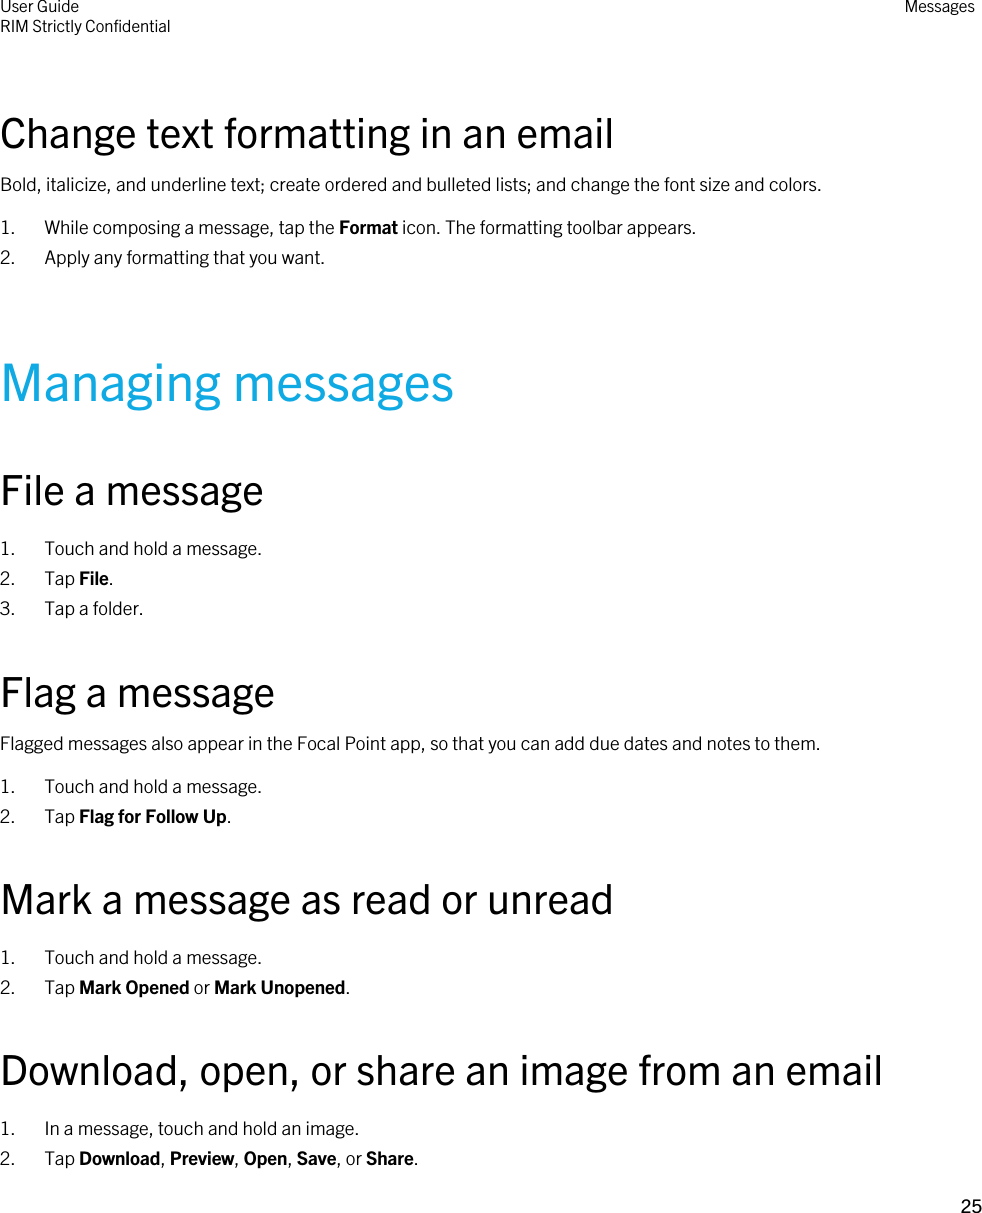 Change text formatting in an emailBold, italicize, and underline text; create ordered and bulleted lists; and change the font size and colors.1. While composing a message, tap the Format icon. The formatting toolbar appears.2. Apply any formatting that you want.Managing messagesFile a message1. Touch and hold a message.2. Tap File.3. Tap a folder.Flag a messageFlagged messages also appear in the Focal Point app, so that you can add due dates and notes to them.1. Touch and hold a message.2. Tap Flag for Follow Up.Mark a message as read or unread1. Touch and hold a message.2. Tap Mark Opened or Mark Unopened.Download, open, or share an image from an email1. In a message, touch and hold an image.2. Tap Download, Preview, Open, Save, or Share.User GuideRIM Strictly ConfidentialMessages25 